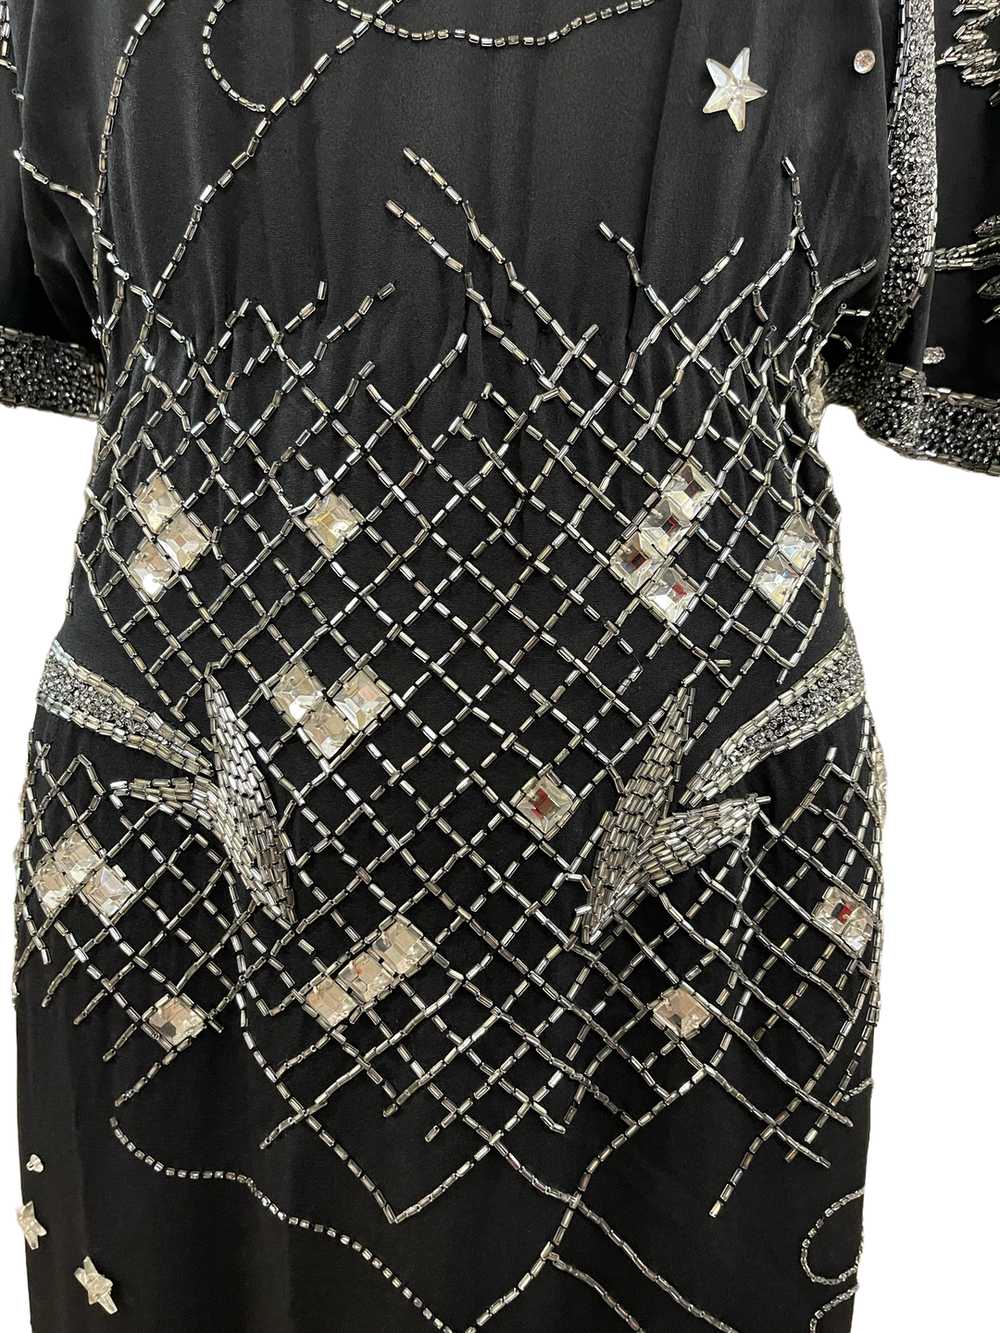 Fabrice 80s Black Beaded Cocktail Dress with Stars - image 6